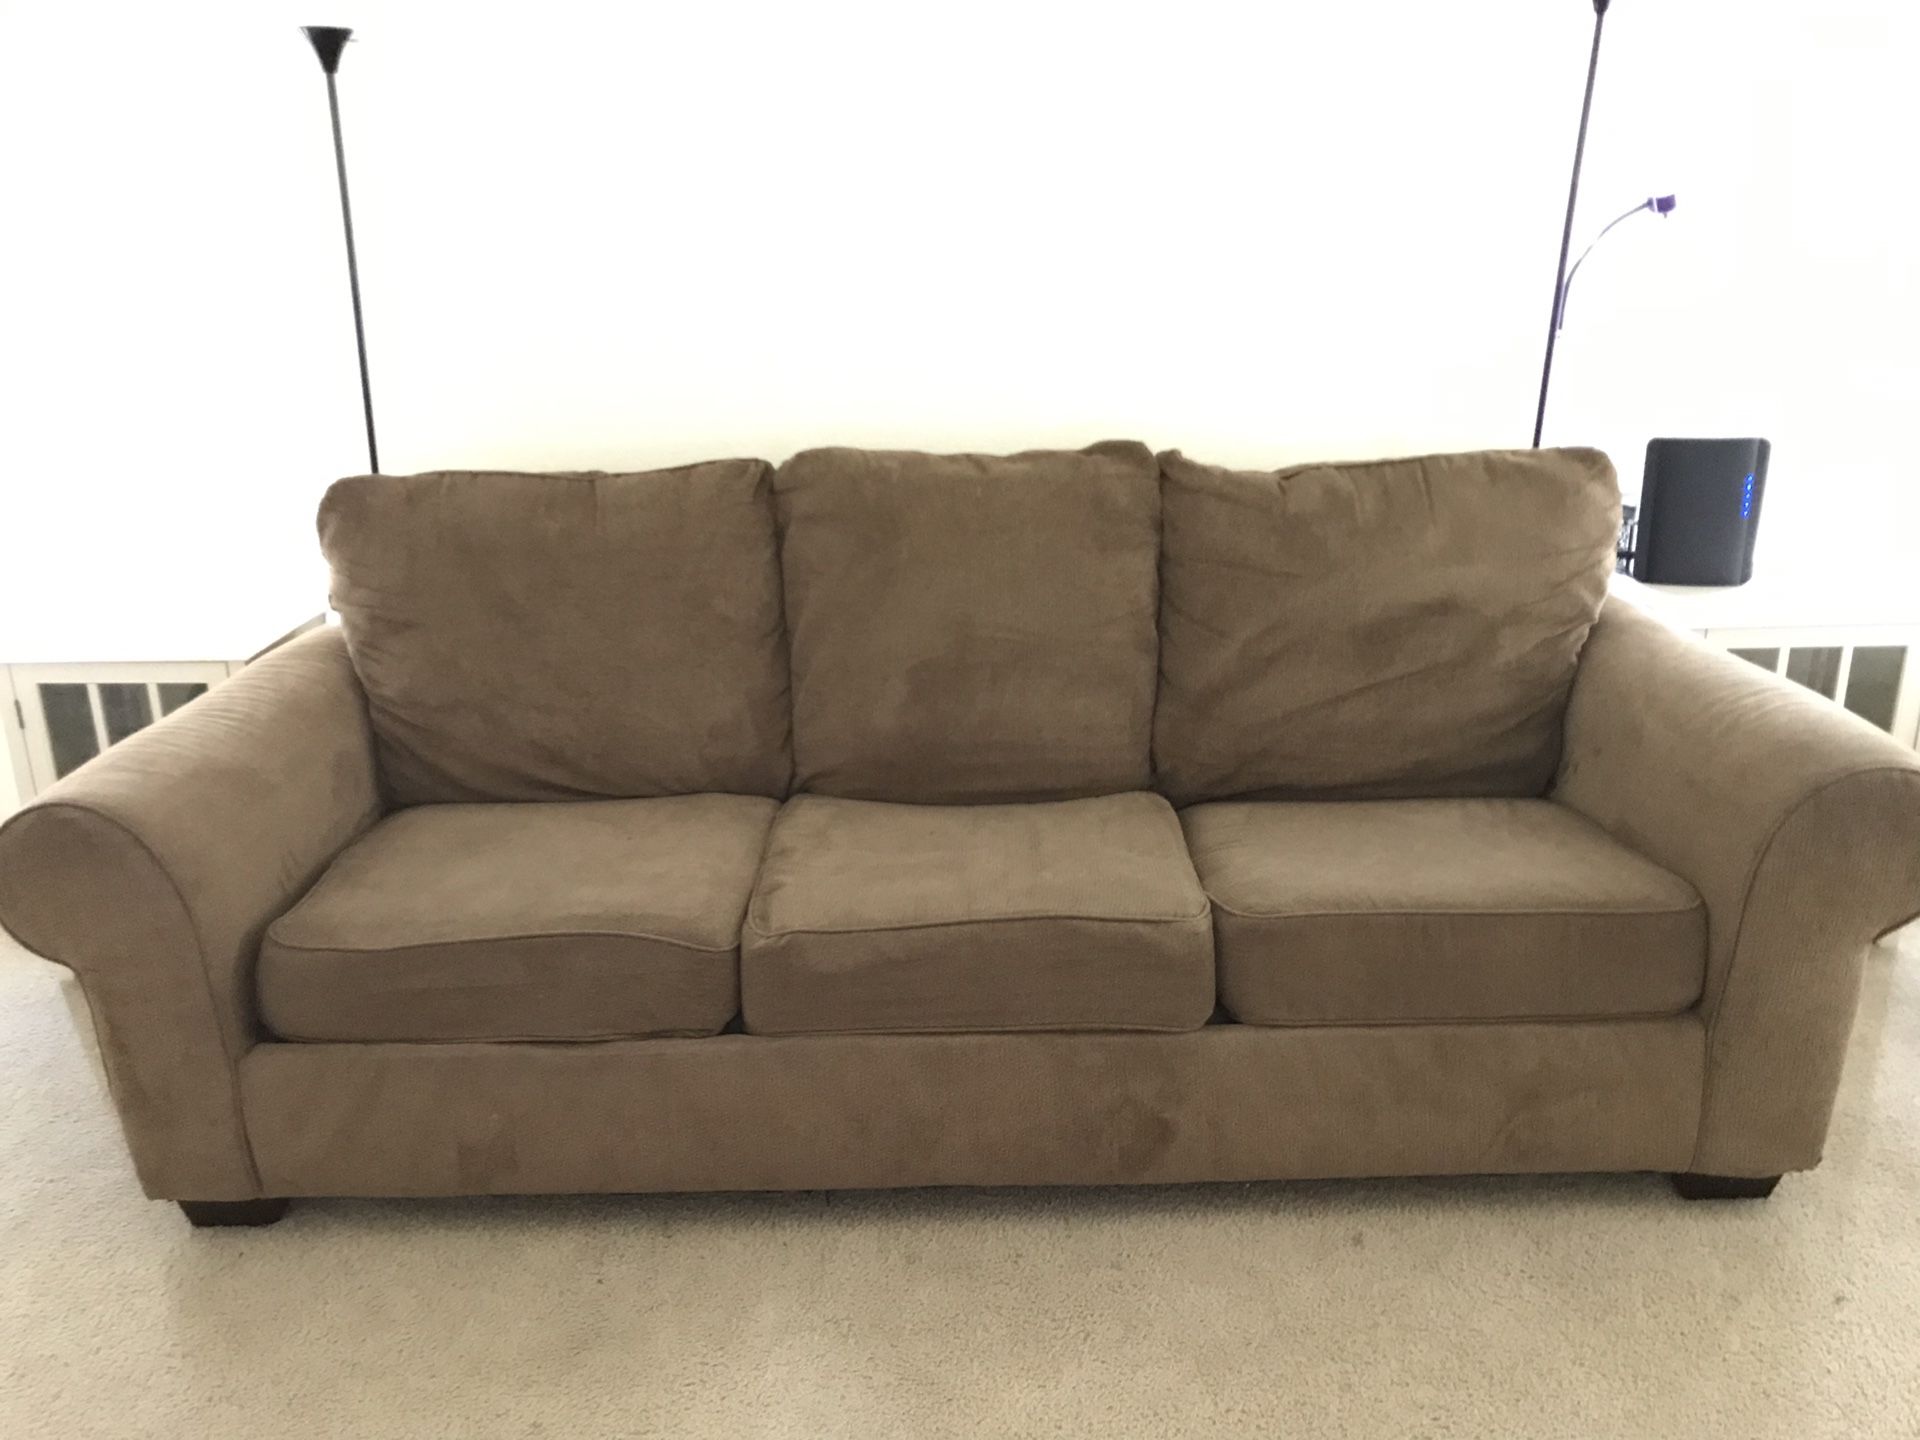 Couch for free *Pending Pick Up*